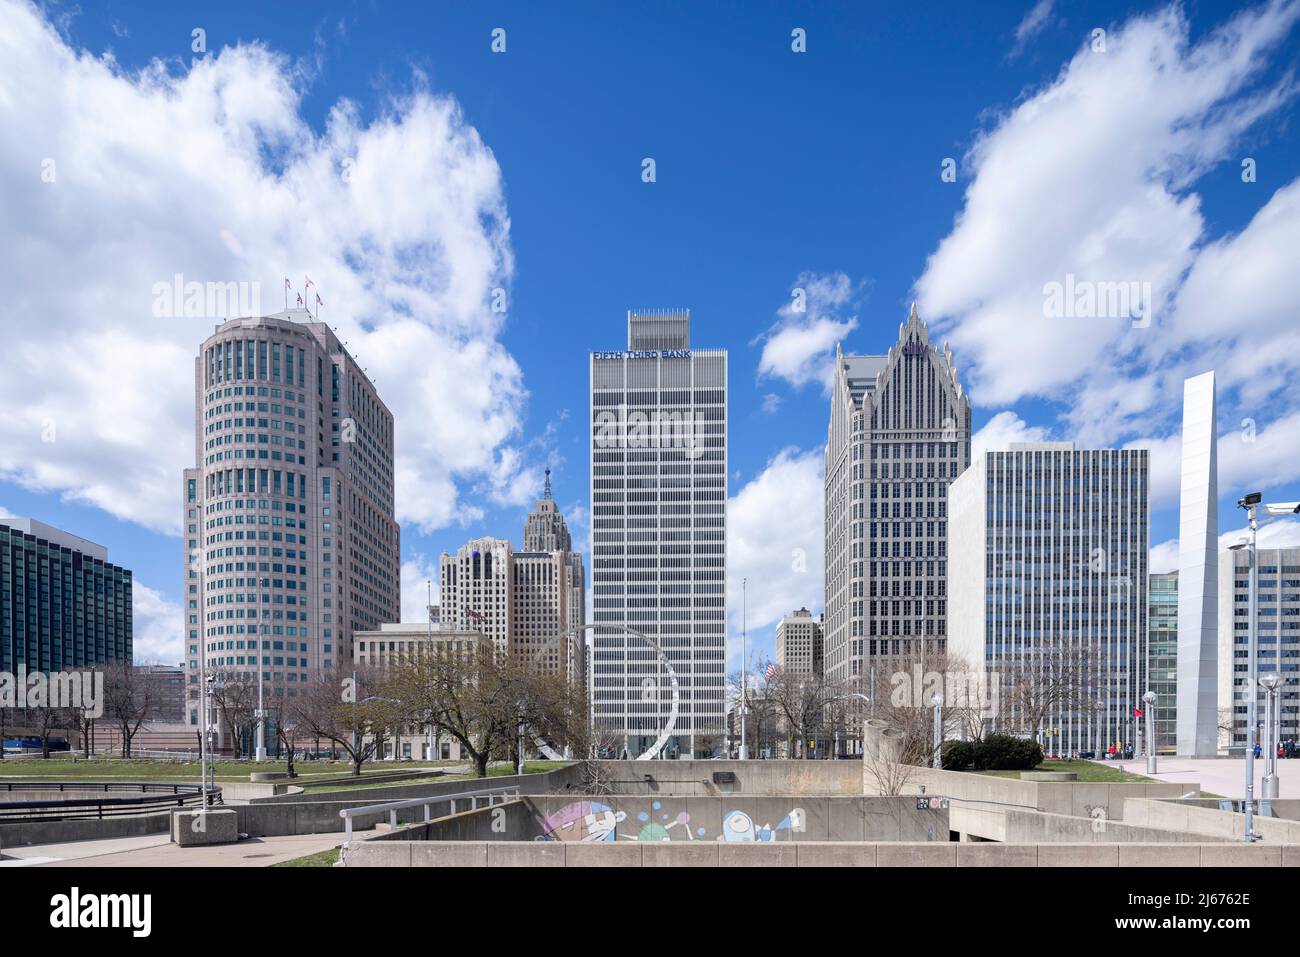 Transcending arch monument at the Philip A. Hart Plaza, downtown Detroit, Michigan, USA, with view of skyscrapers Stock Photo